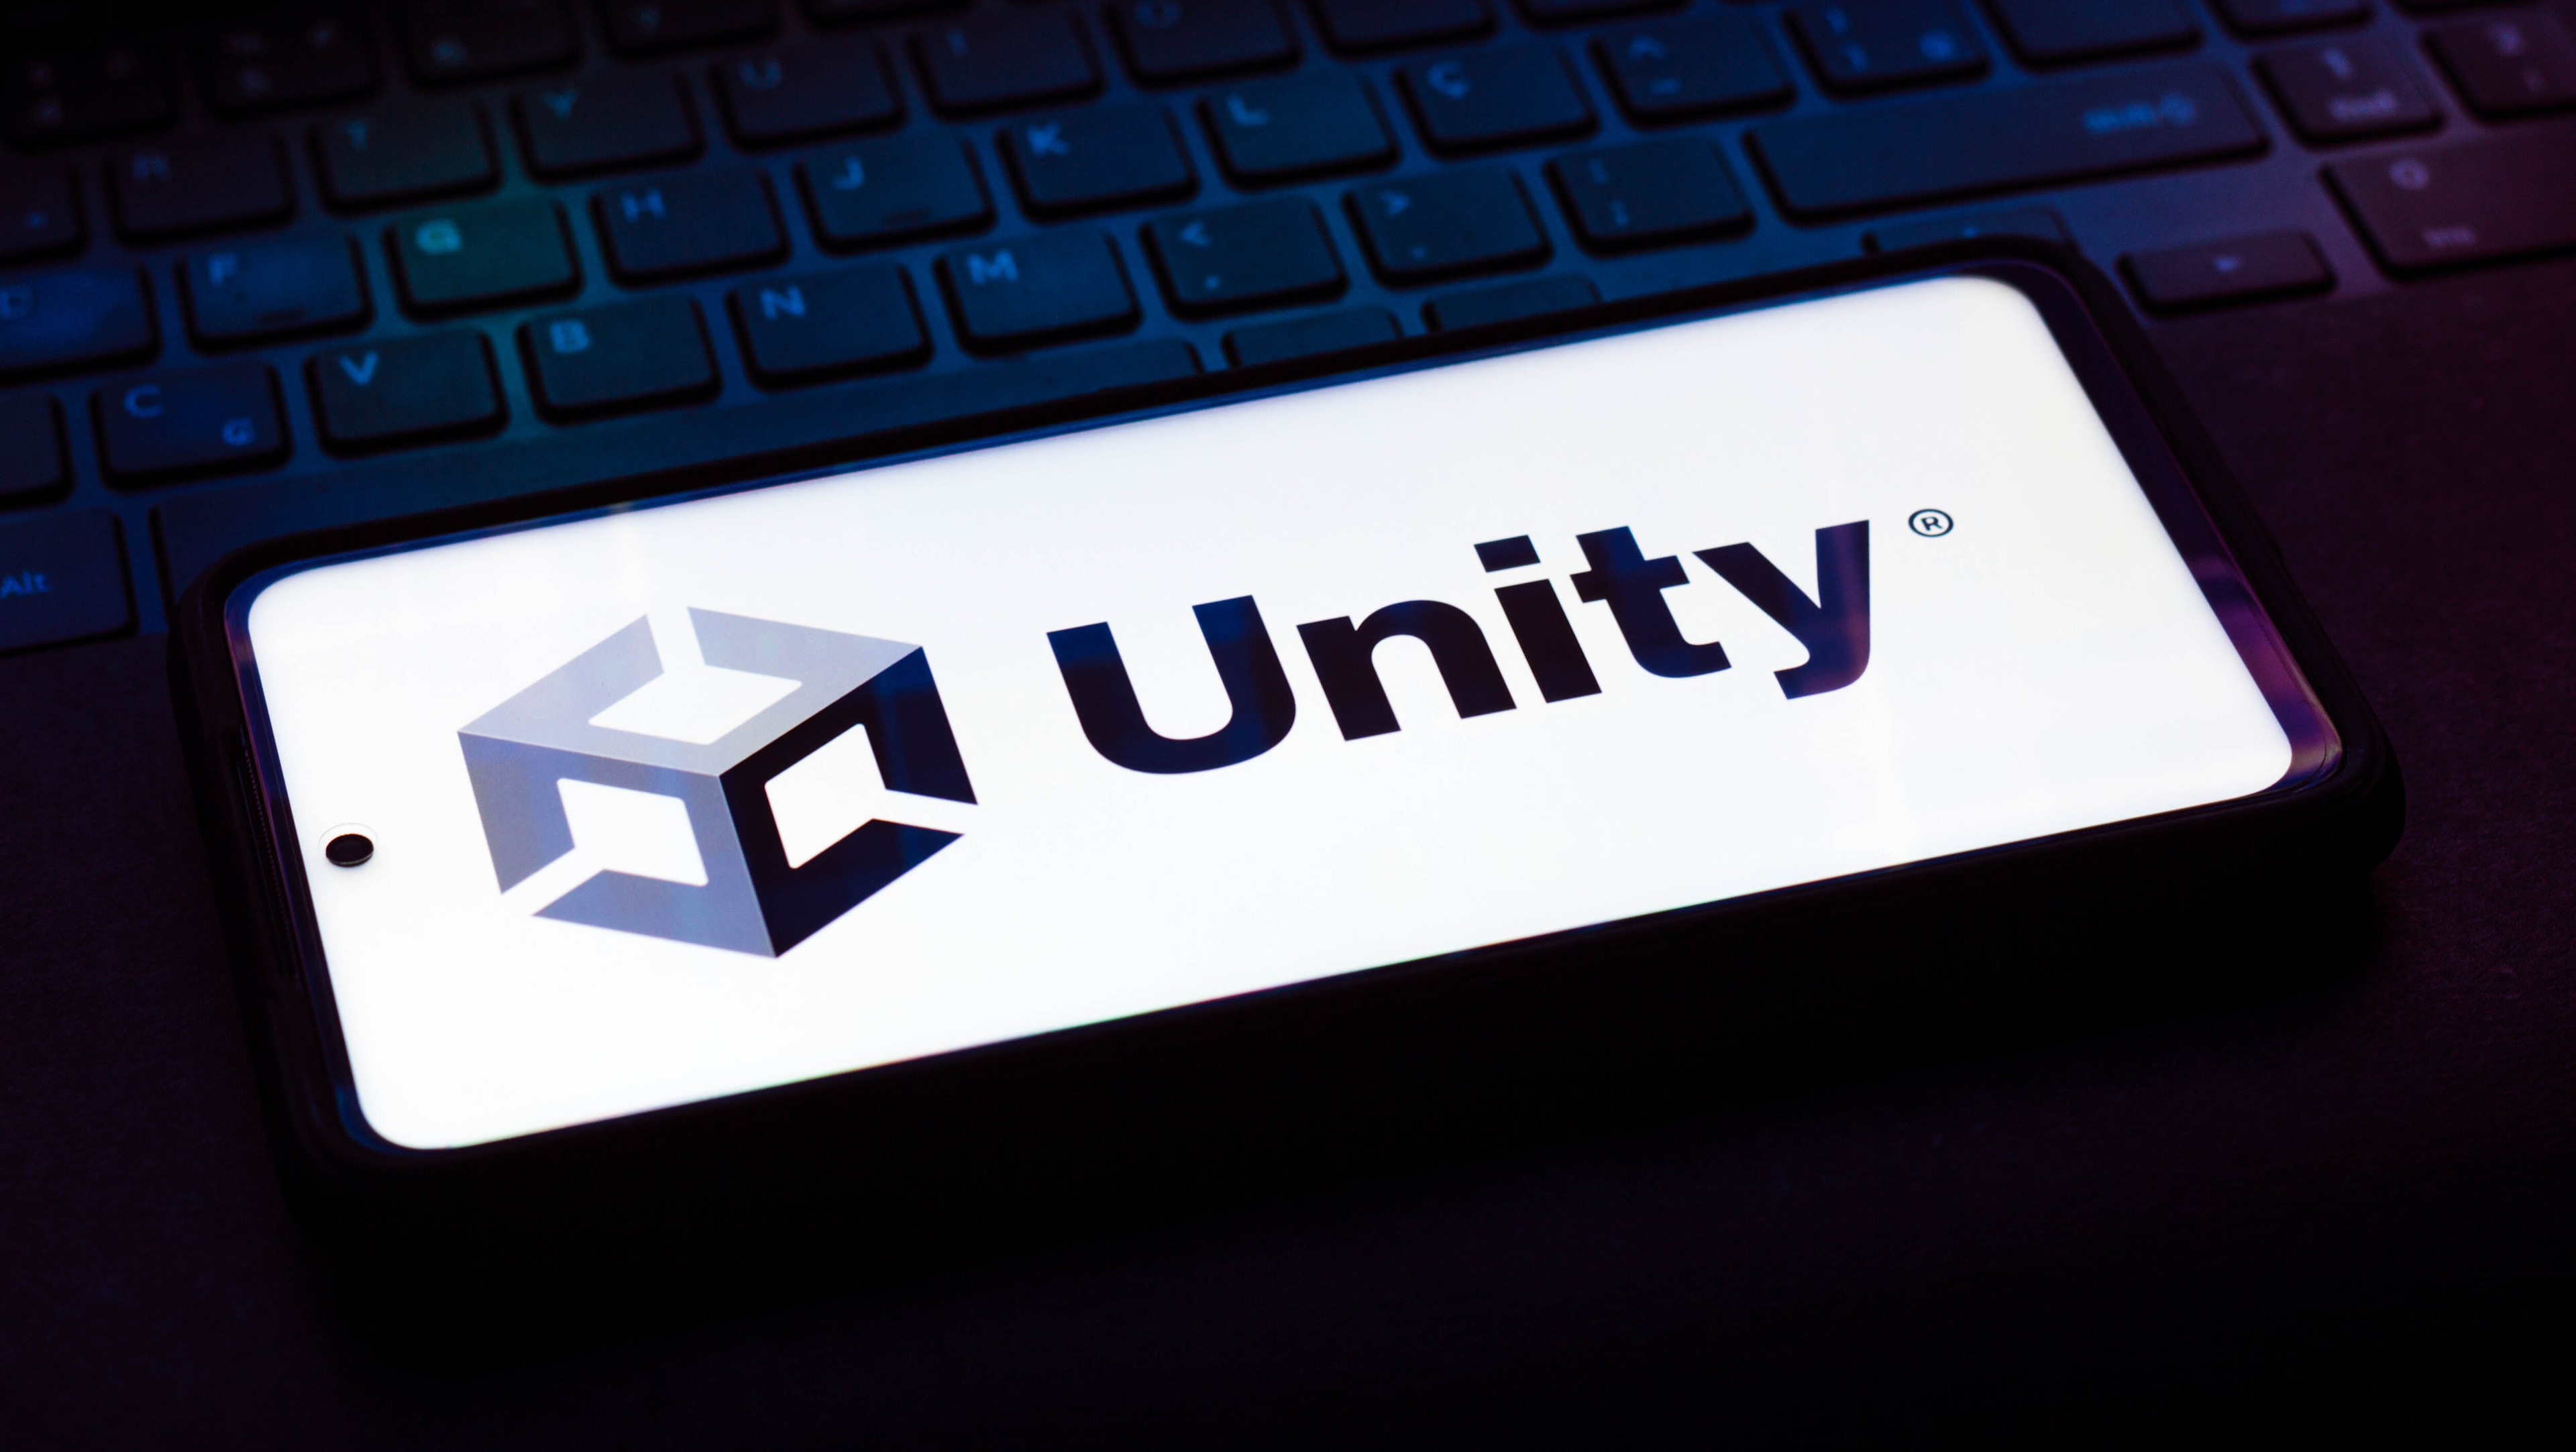 After earning $544 million in its most recent quarter, Unity says even more layoffs are 'likely'